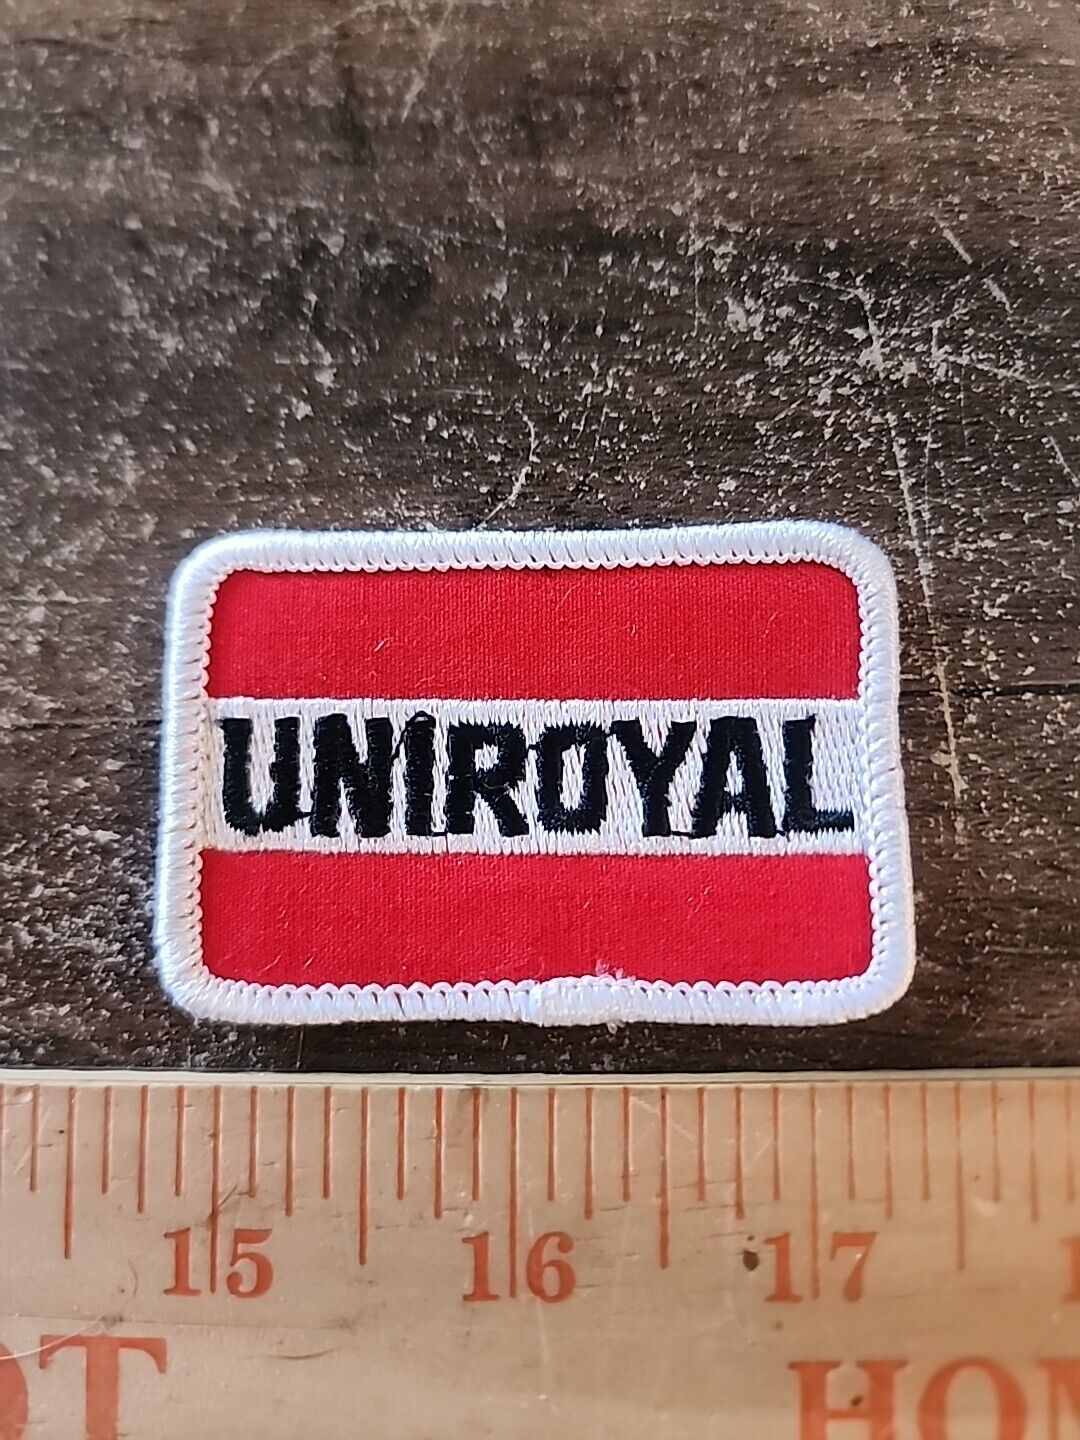 Vintage Uniroyal Sew On Patch 